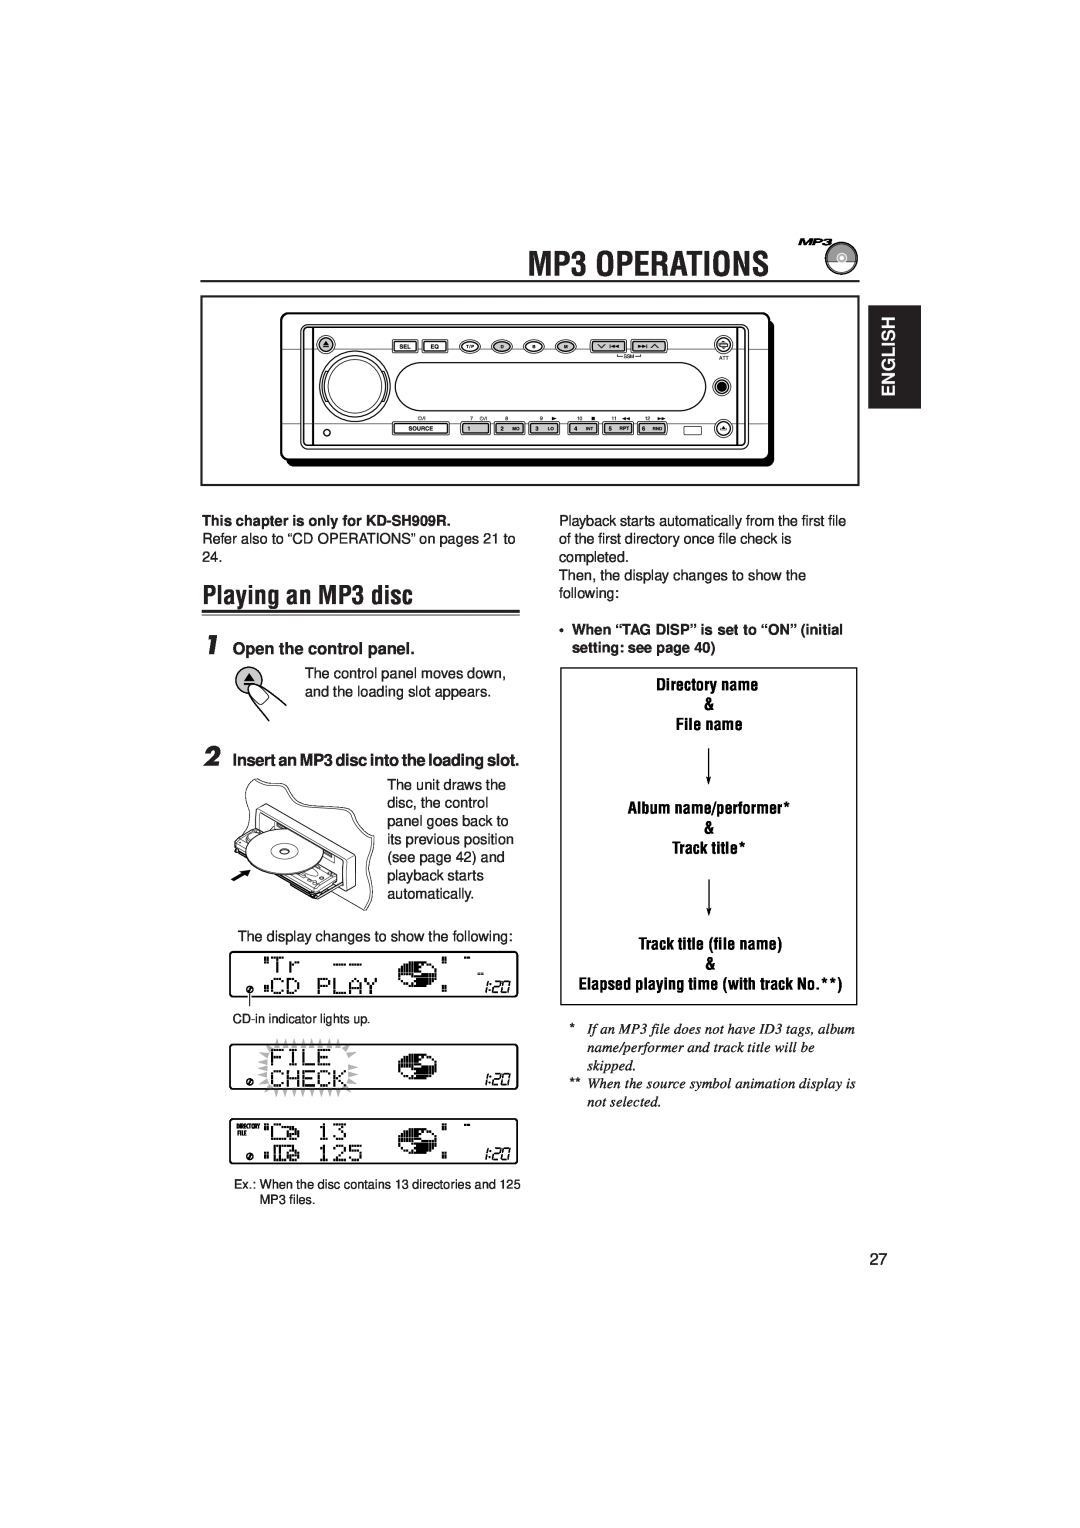 JVC KD-SH707R MP3 OPERATIONS, Playing an MP3 disc, English, Open the control panel, Track title Track title file name 